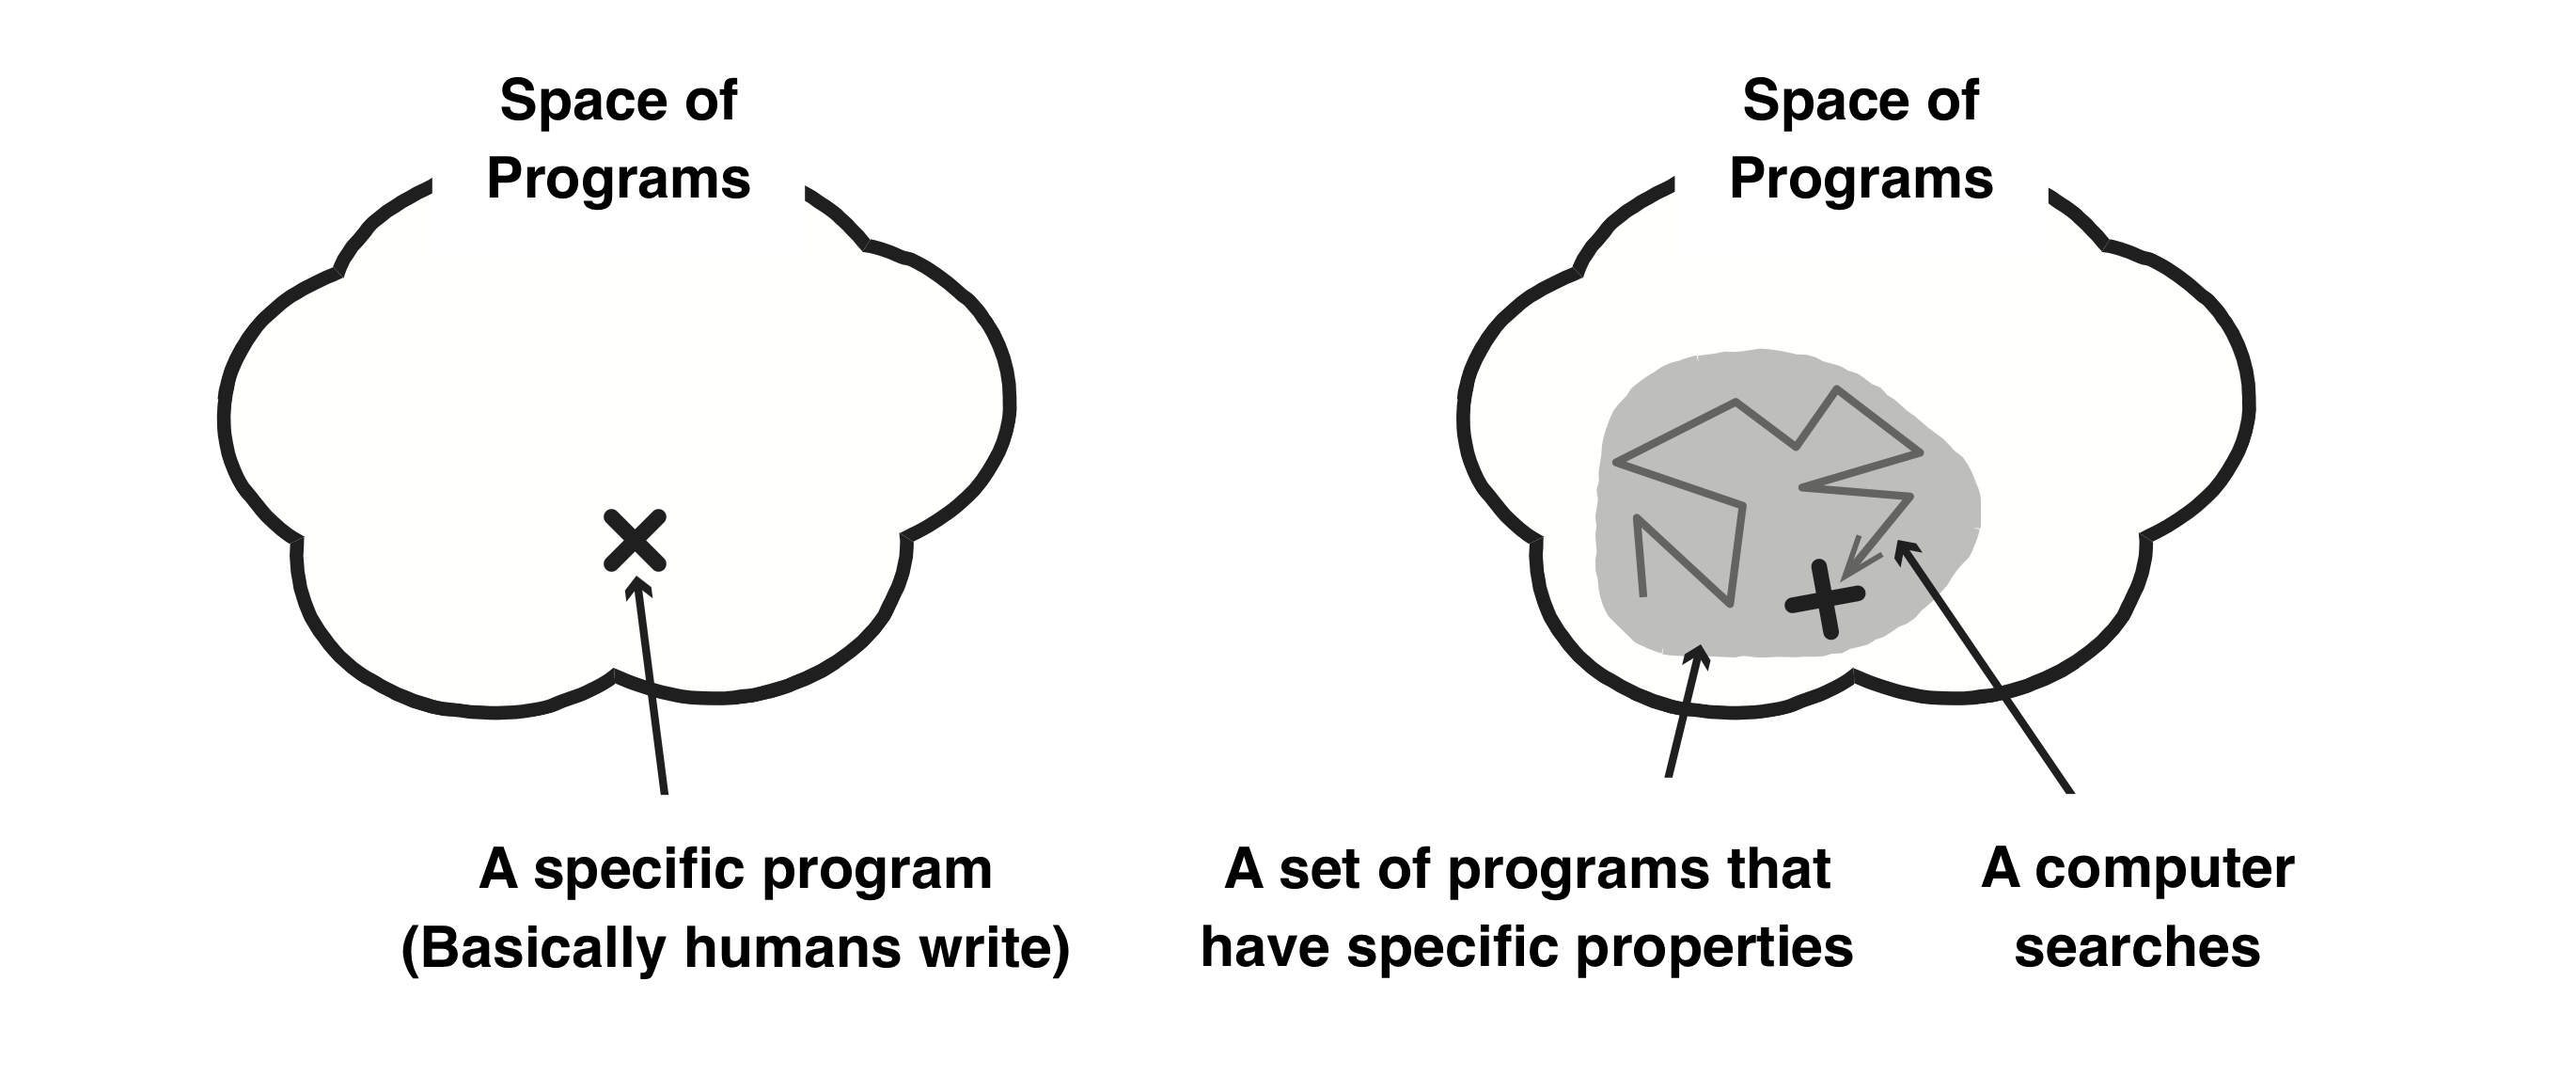 Find a program that best meets the specifications from a set of programs with specific properties